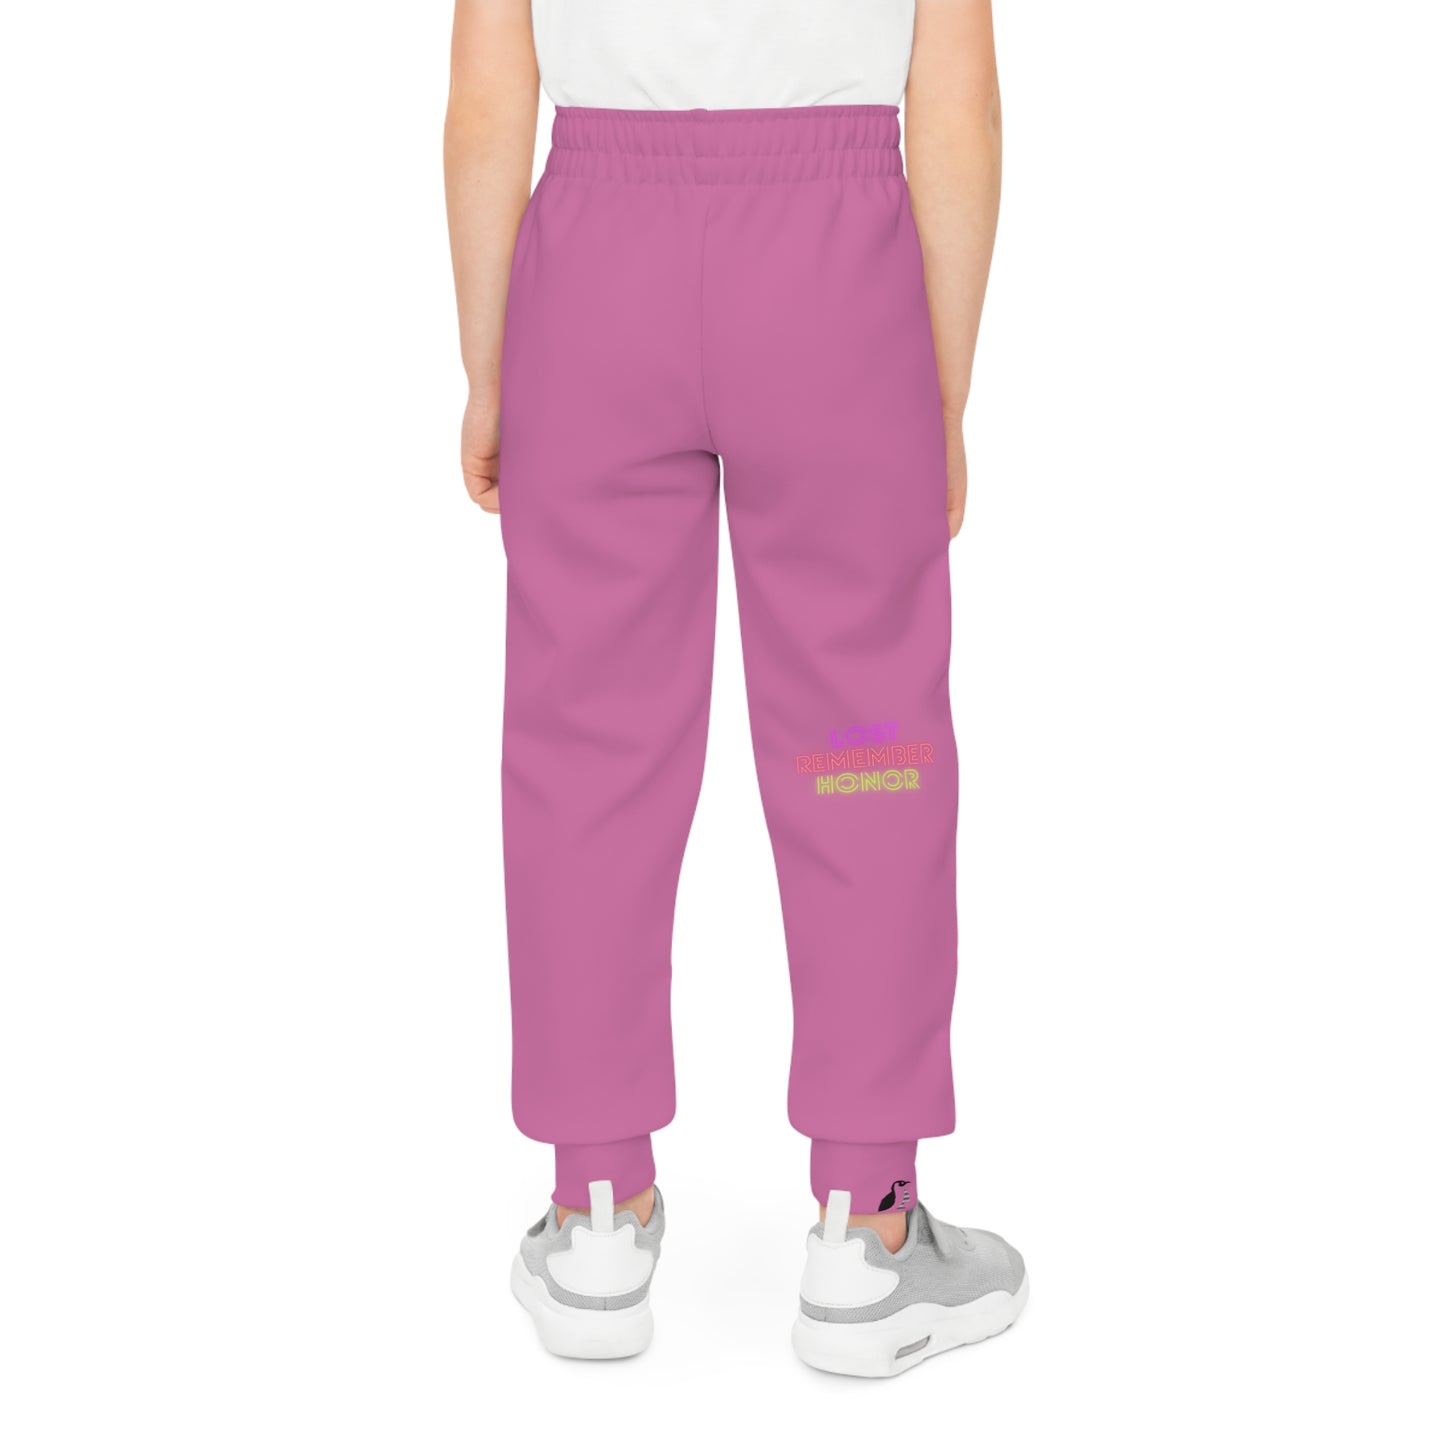 Youth Joggers: Racing Lite Pink